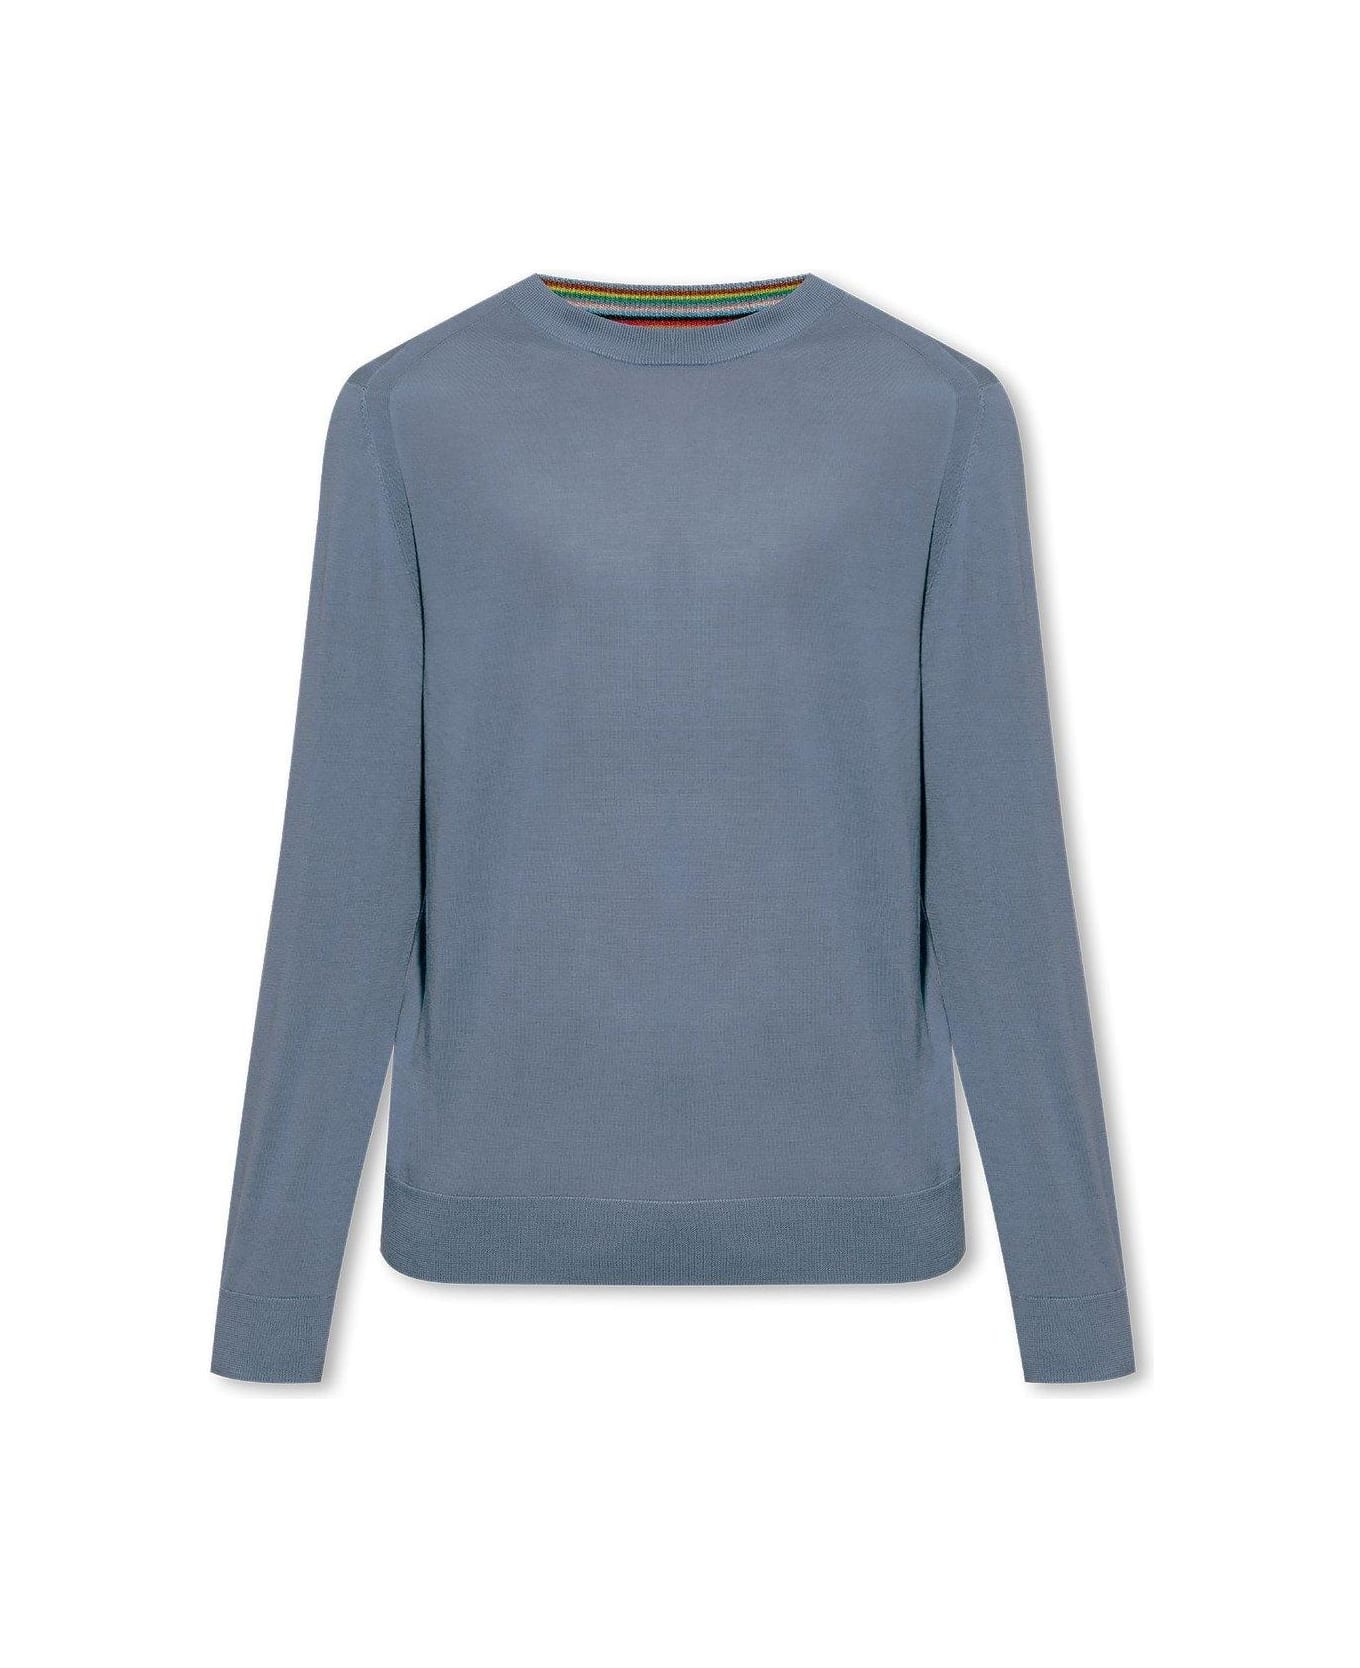 Paul Smith Sweater With Logo - NAVY